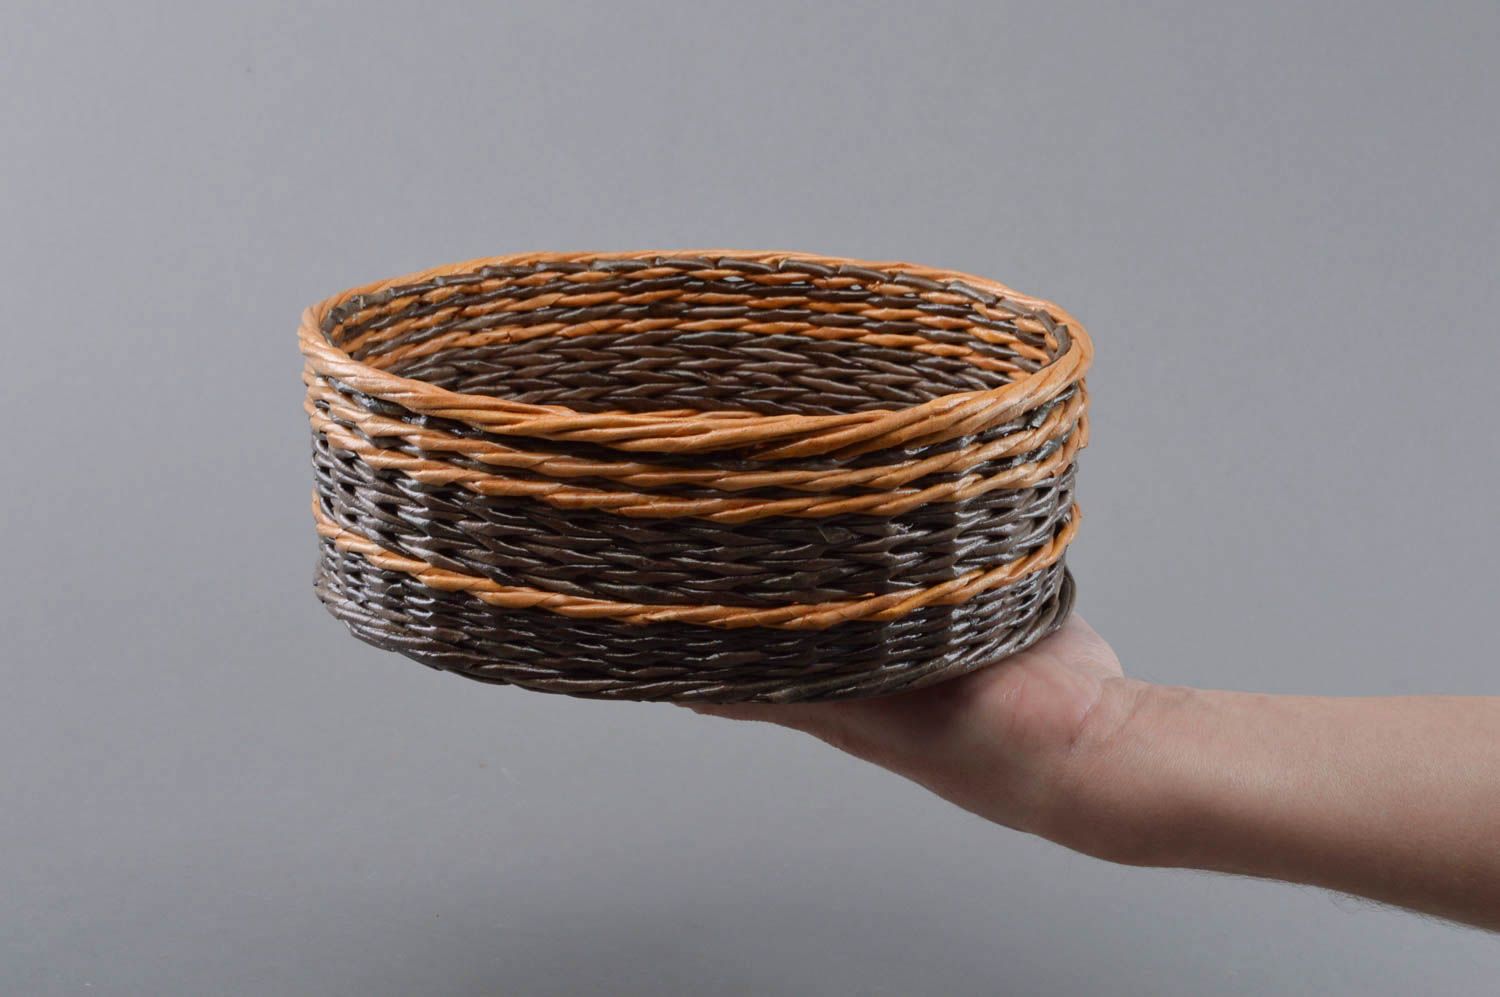 Handmade round brown decorative basket woven of paper rod for interior  photo 1